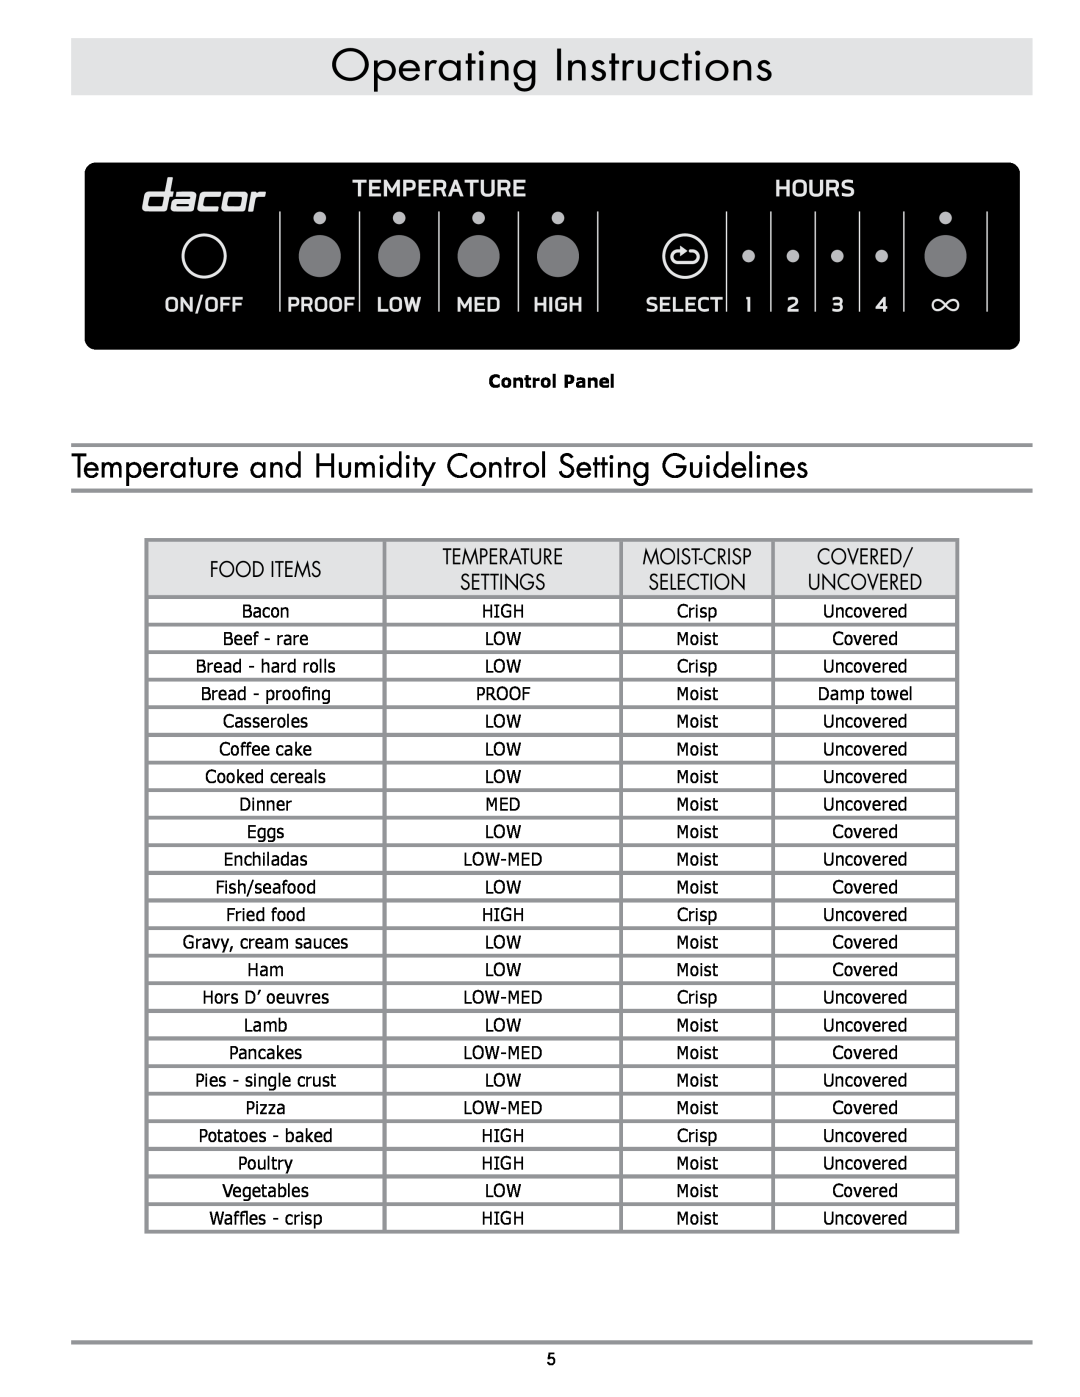 Dacor ERWD30 manual Operating Instructions, Food Items, Temperature, Covered, Moist-Crisp, Uncovered, Control Panel 